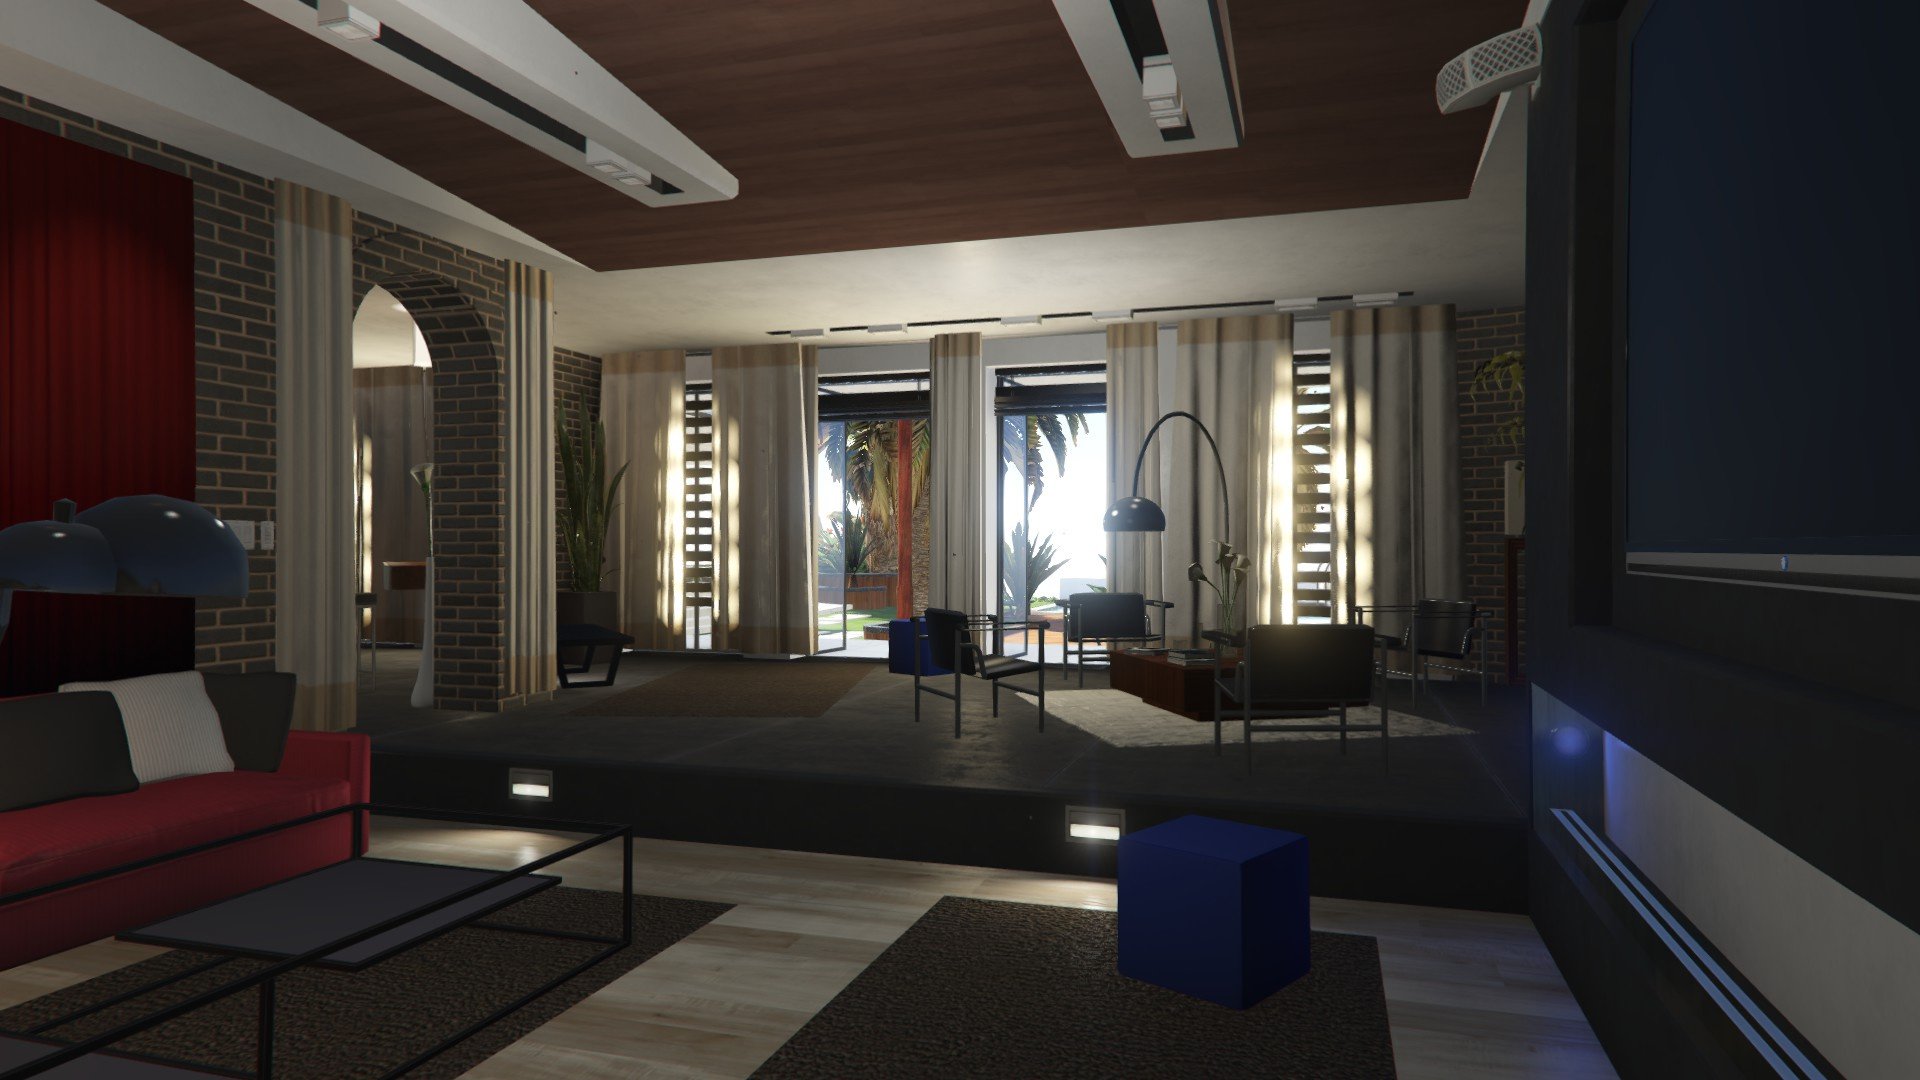 how to change apartment interior gta online